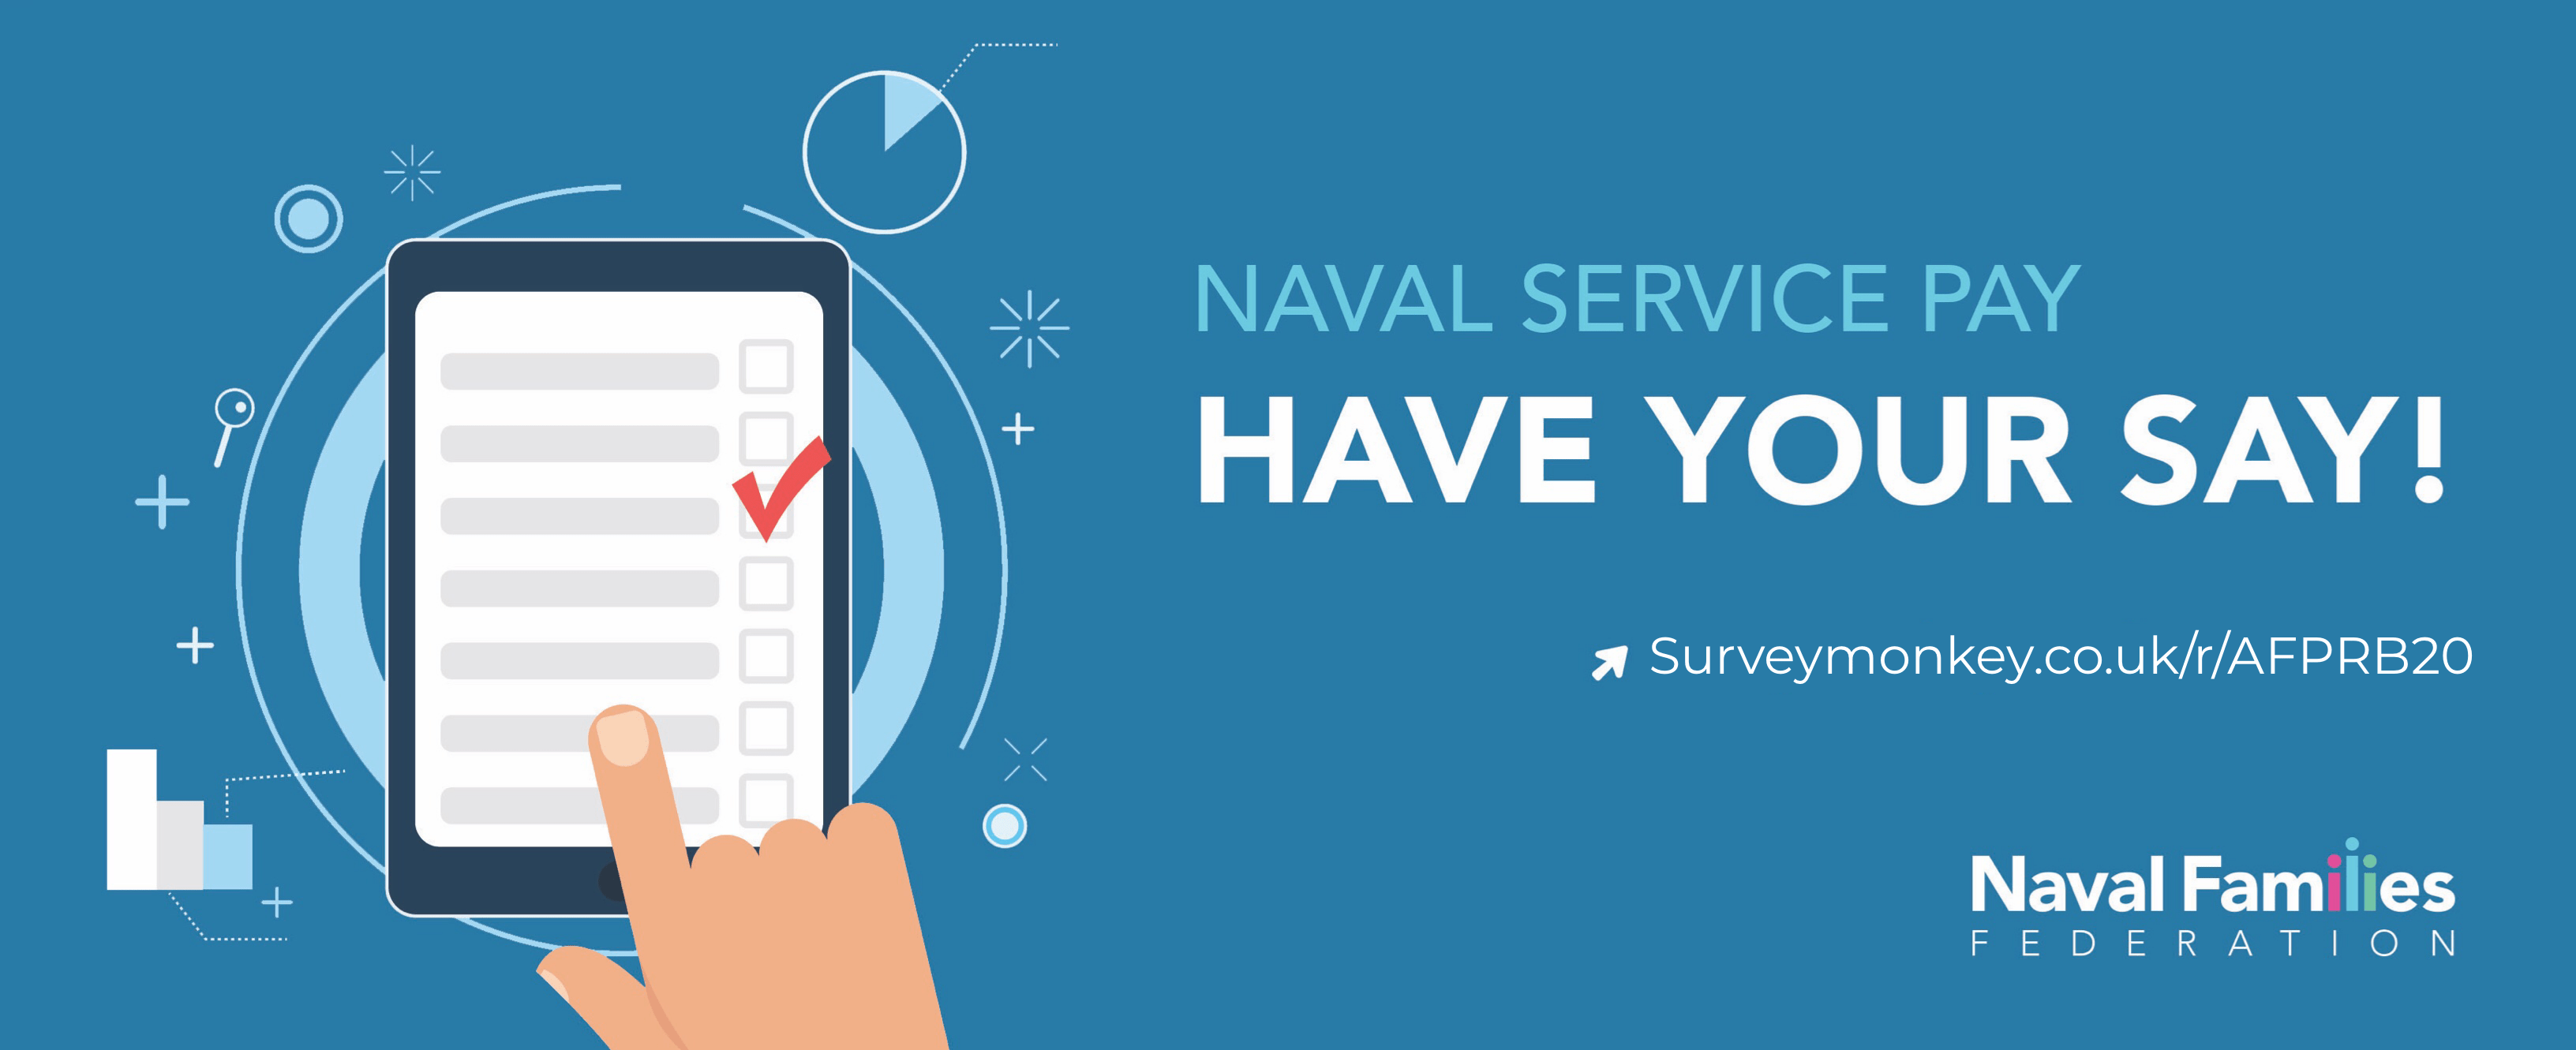 Poster depicting the naval service pay survey